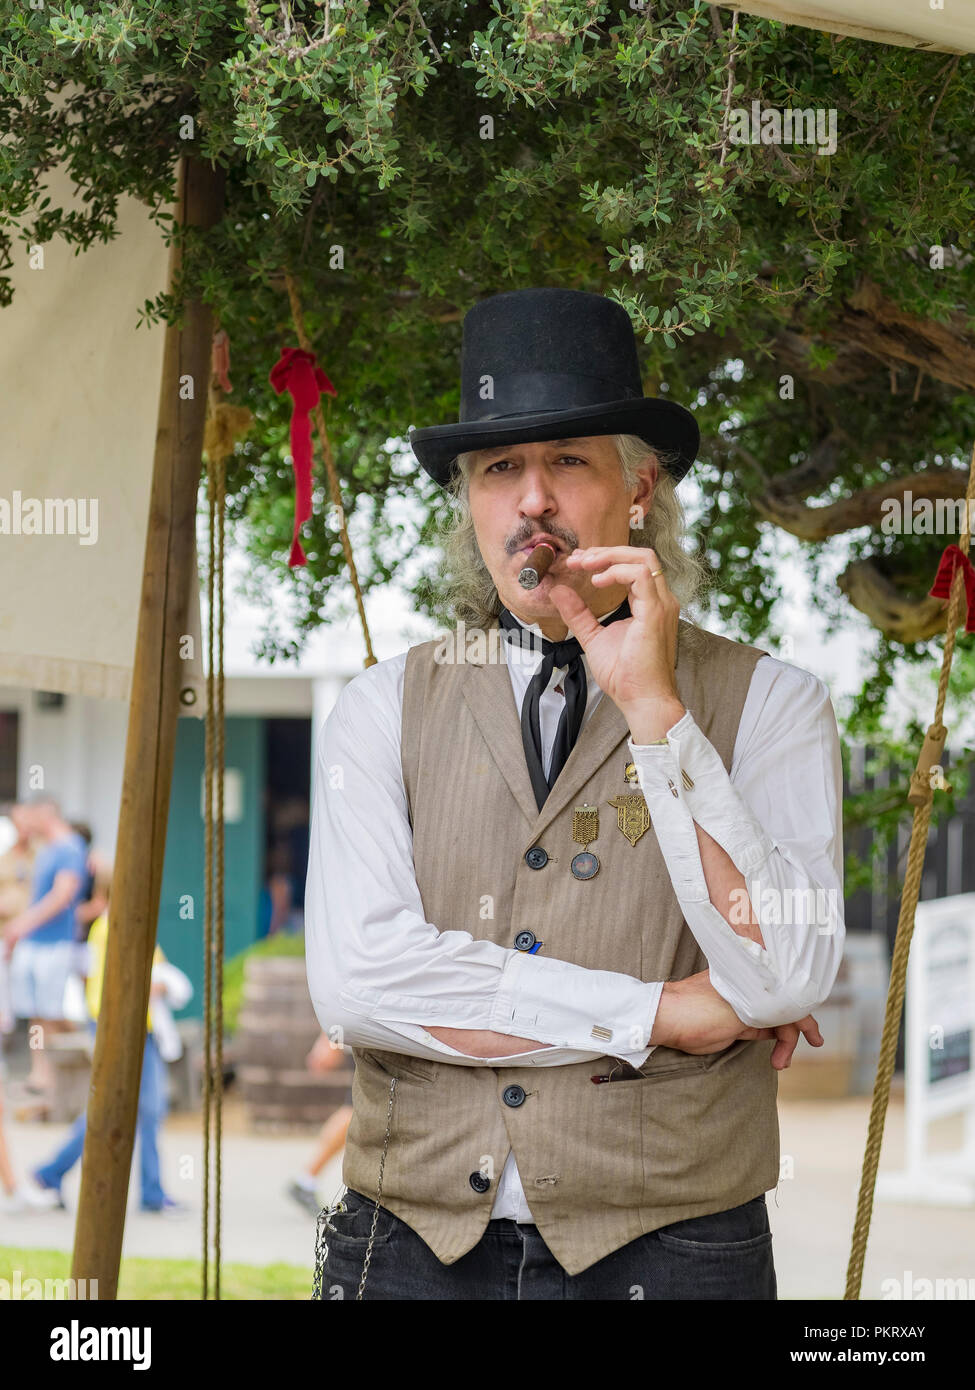 San Diego, AUG 2: People costume in ancient style smoking tobacco in the historical old town on AUG 2, 2014 at San Diego, California Stock Photo